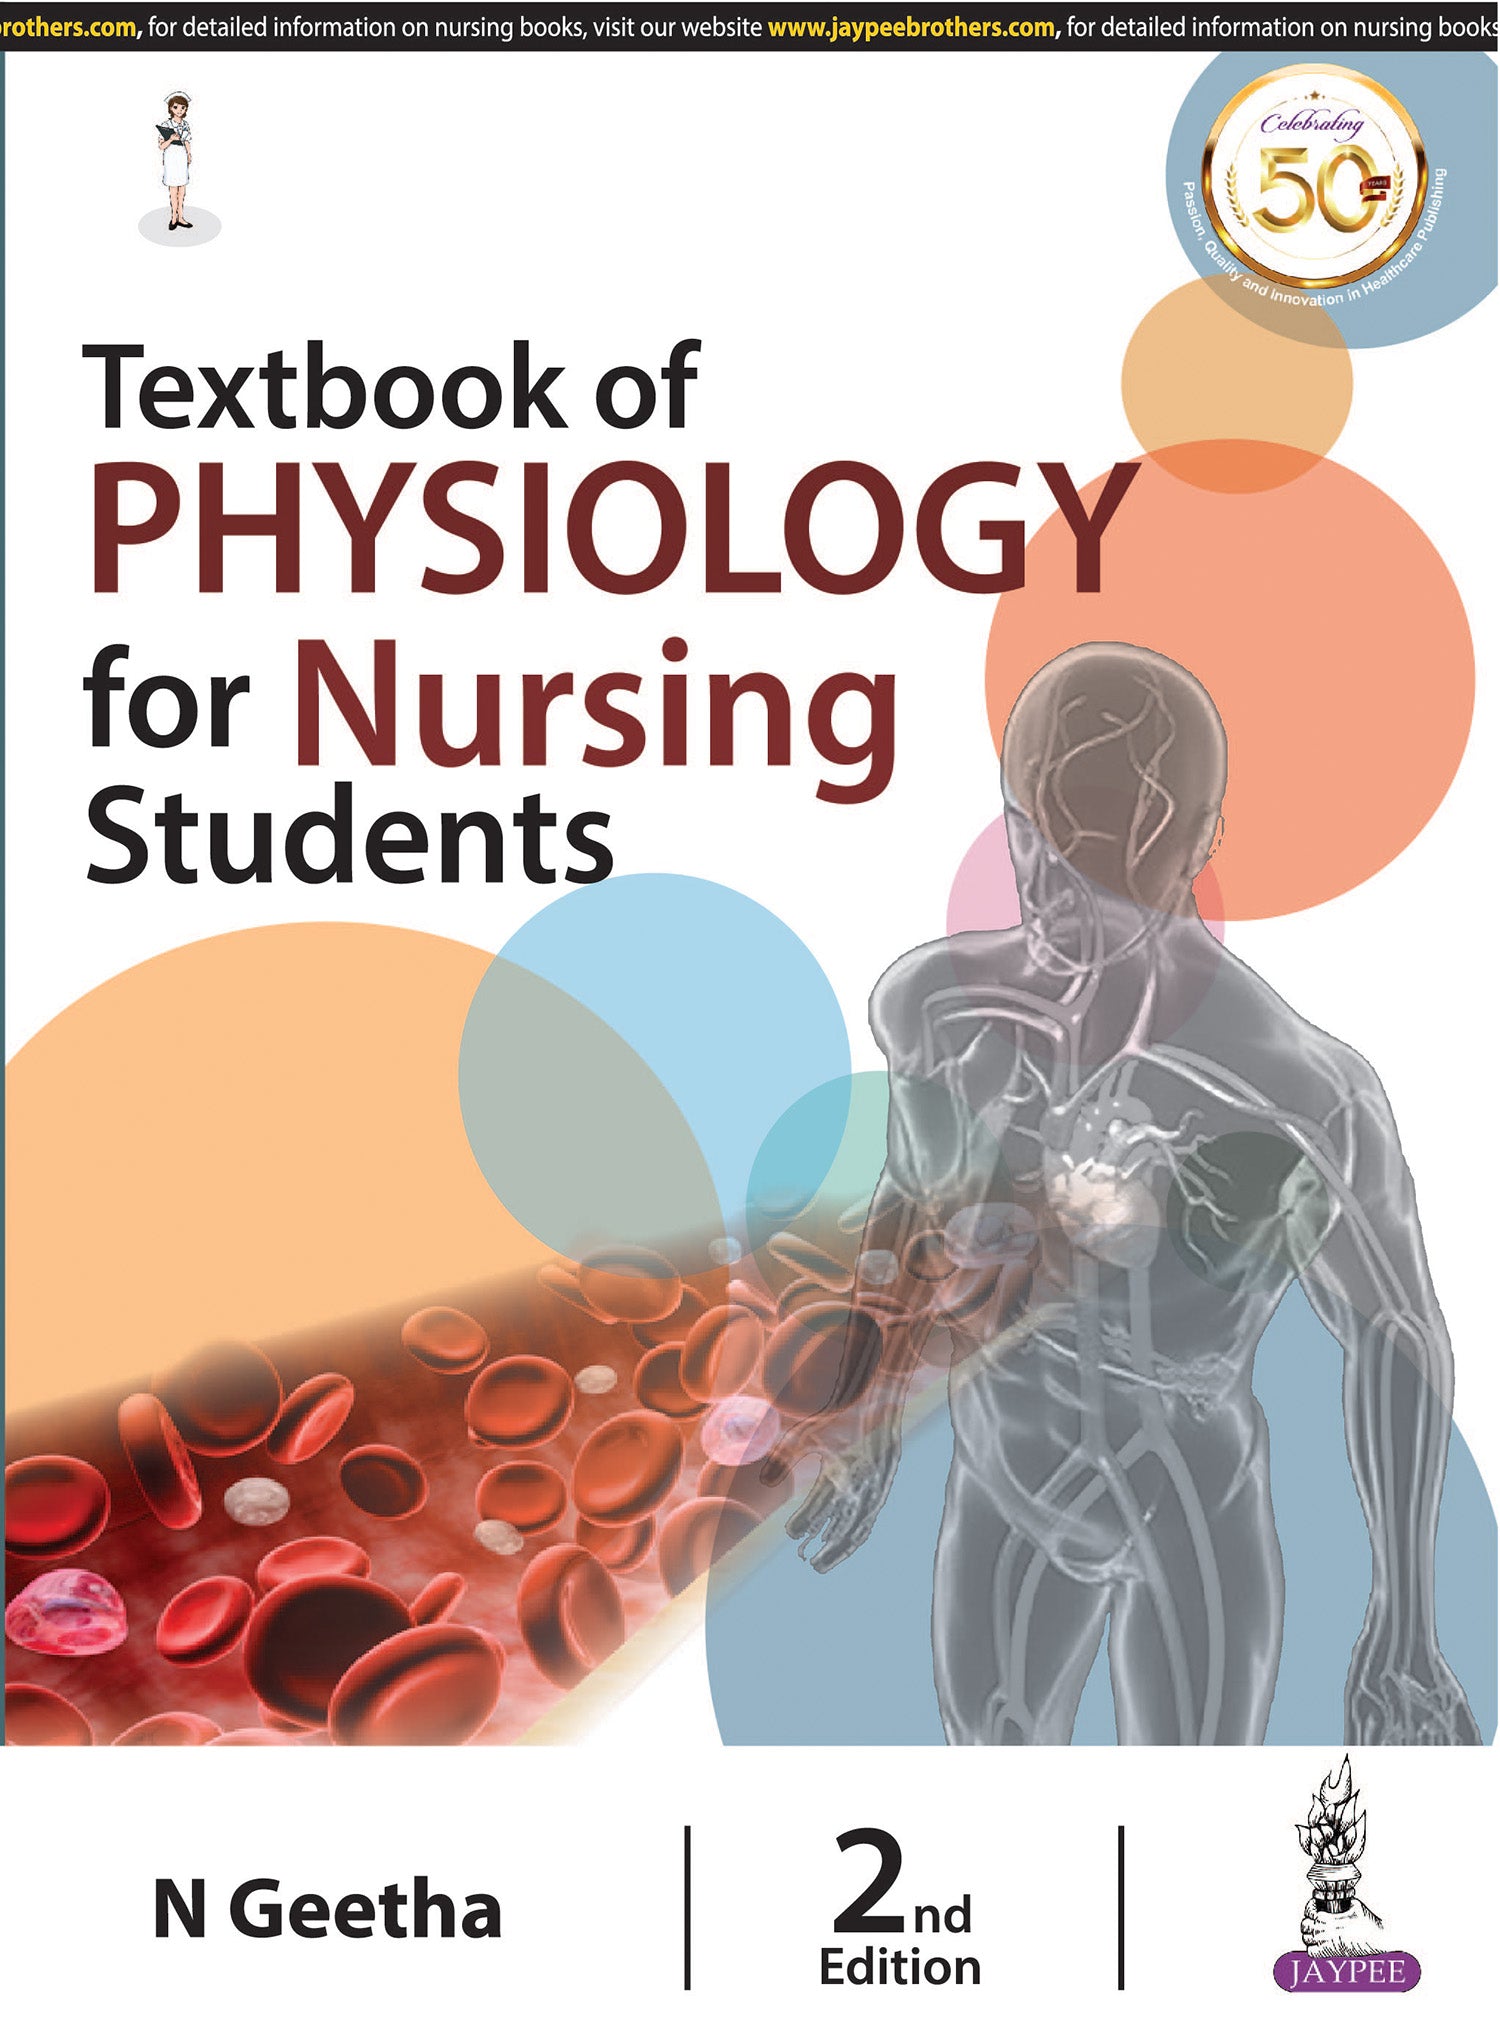 TEXTBOOK OF PHYSIOLOGY FOR NURSING STUDENTS,2/E,GEETHA N